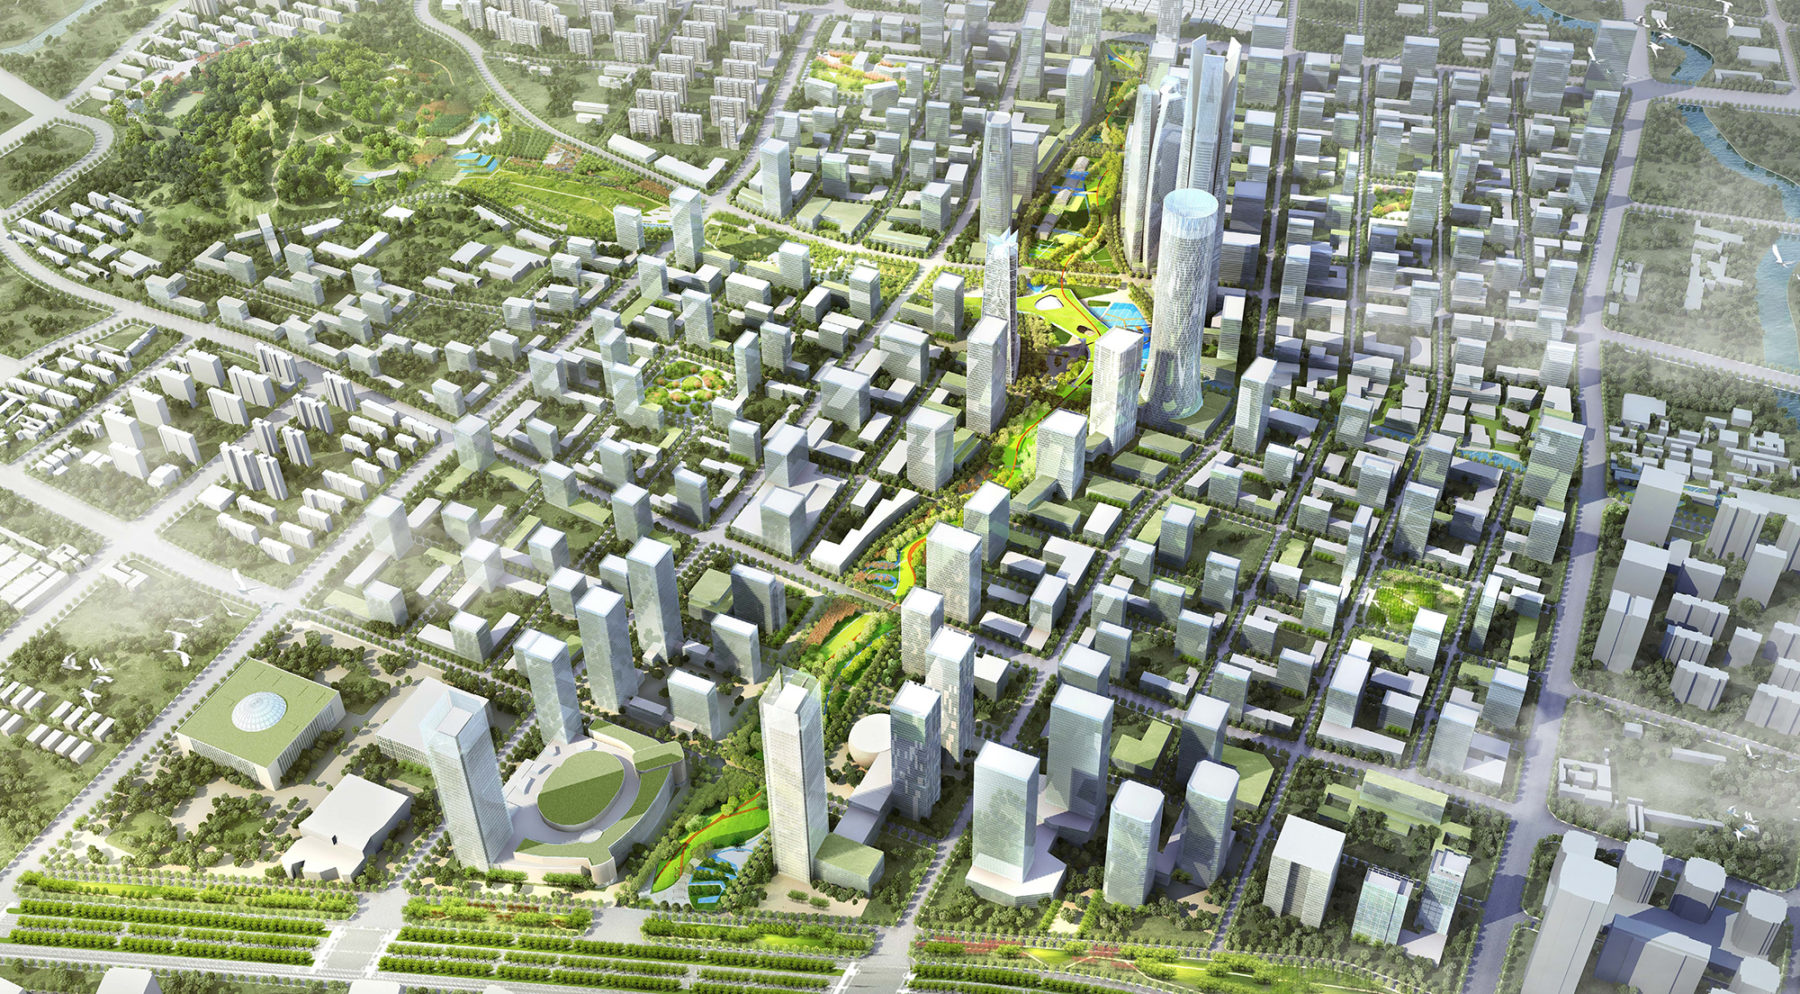 Overhead rendering of cityscape